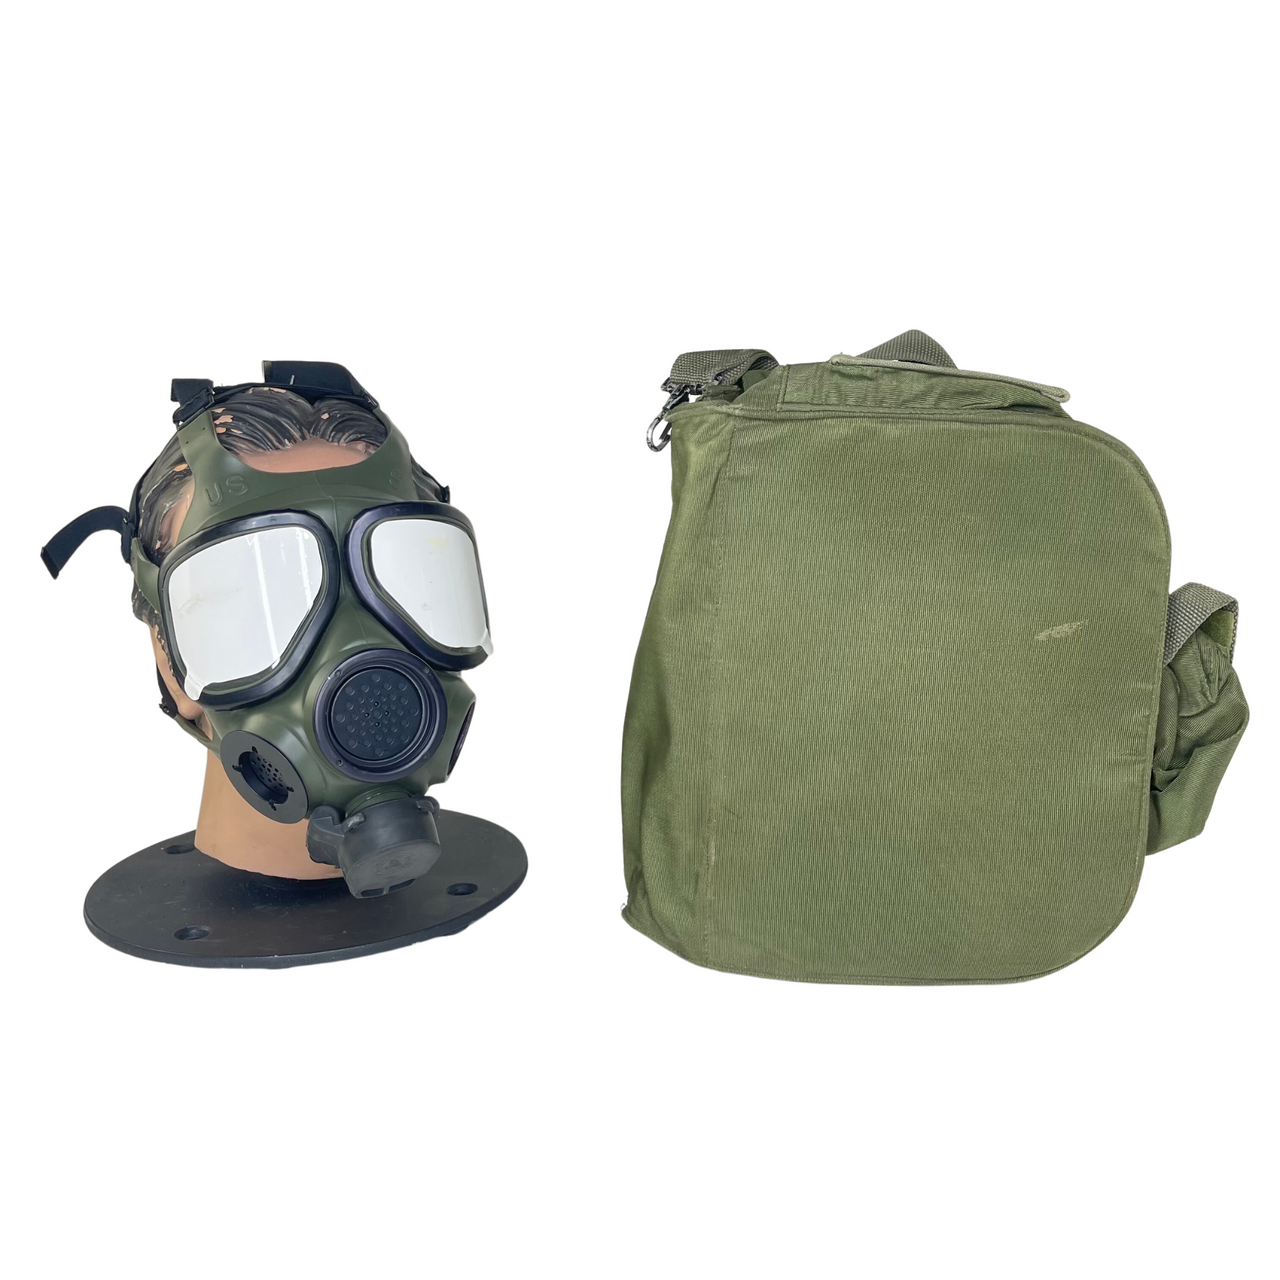 GM88 M40 SERIES G.I. ISSUE GAS MASK, SMALL